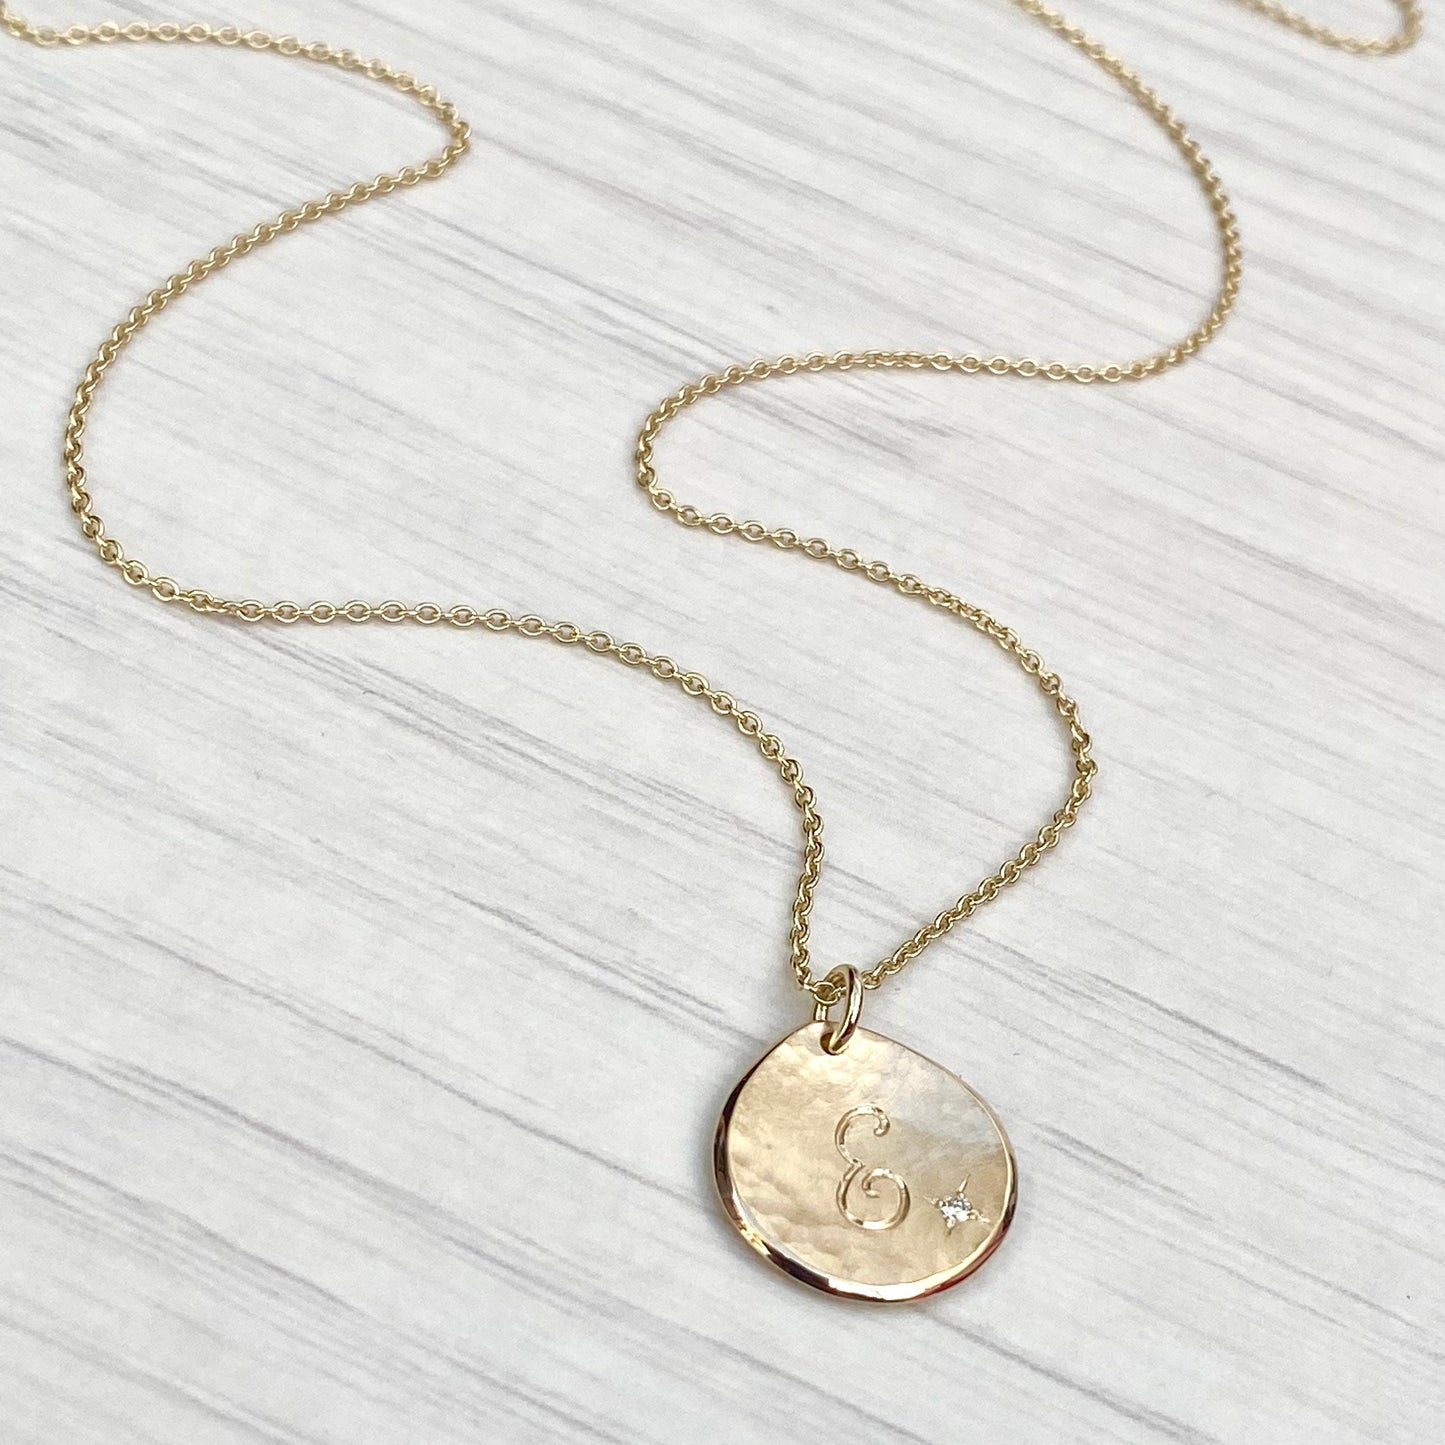 Handmade to order - 9ct solid yellow gold personalised 16mm diamond petal charm pendant on a 1.2mm wide trace chain